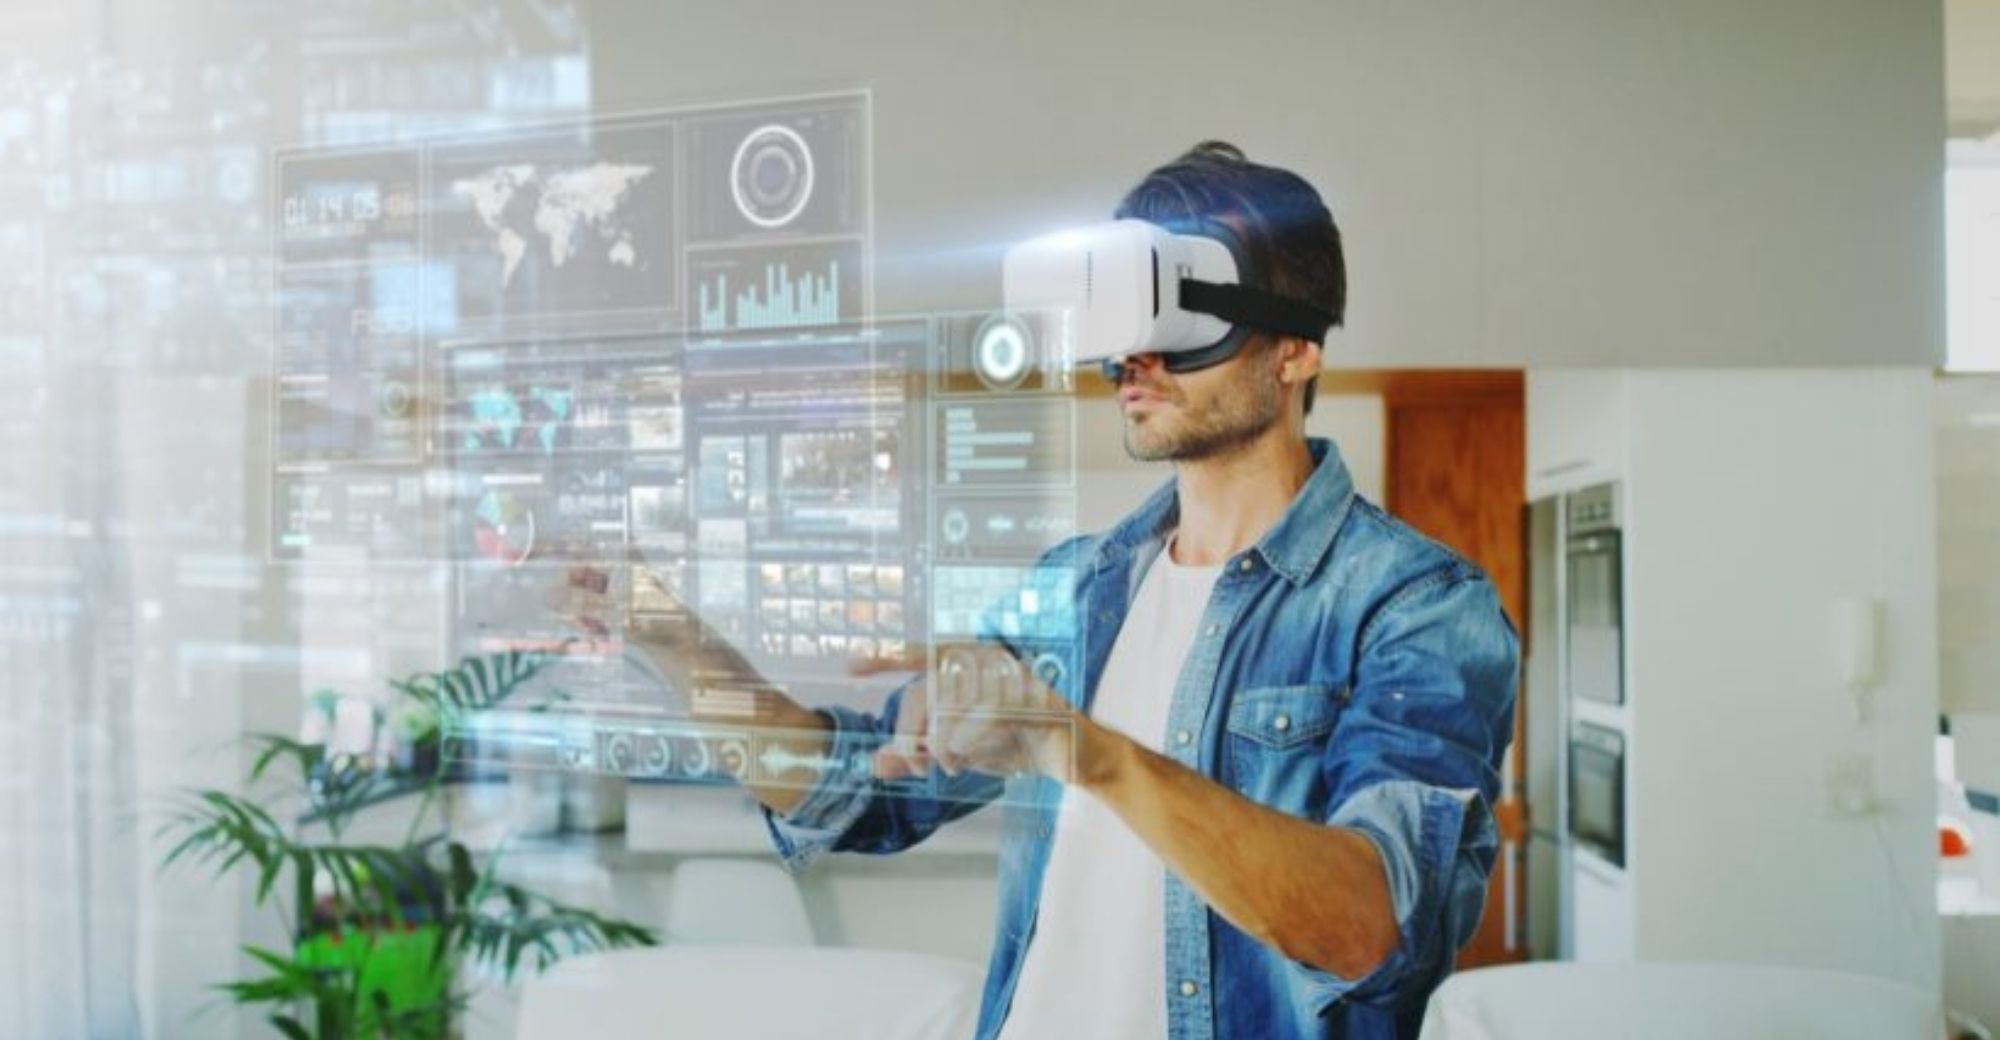 IDC Predicts China’s AR/VR Market to Exceed $13B in 2026